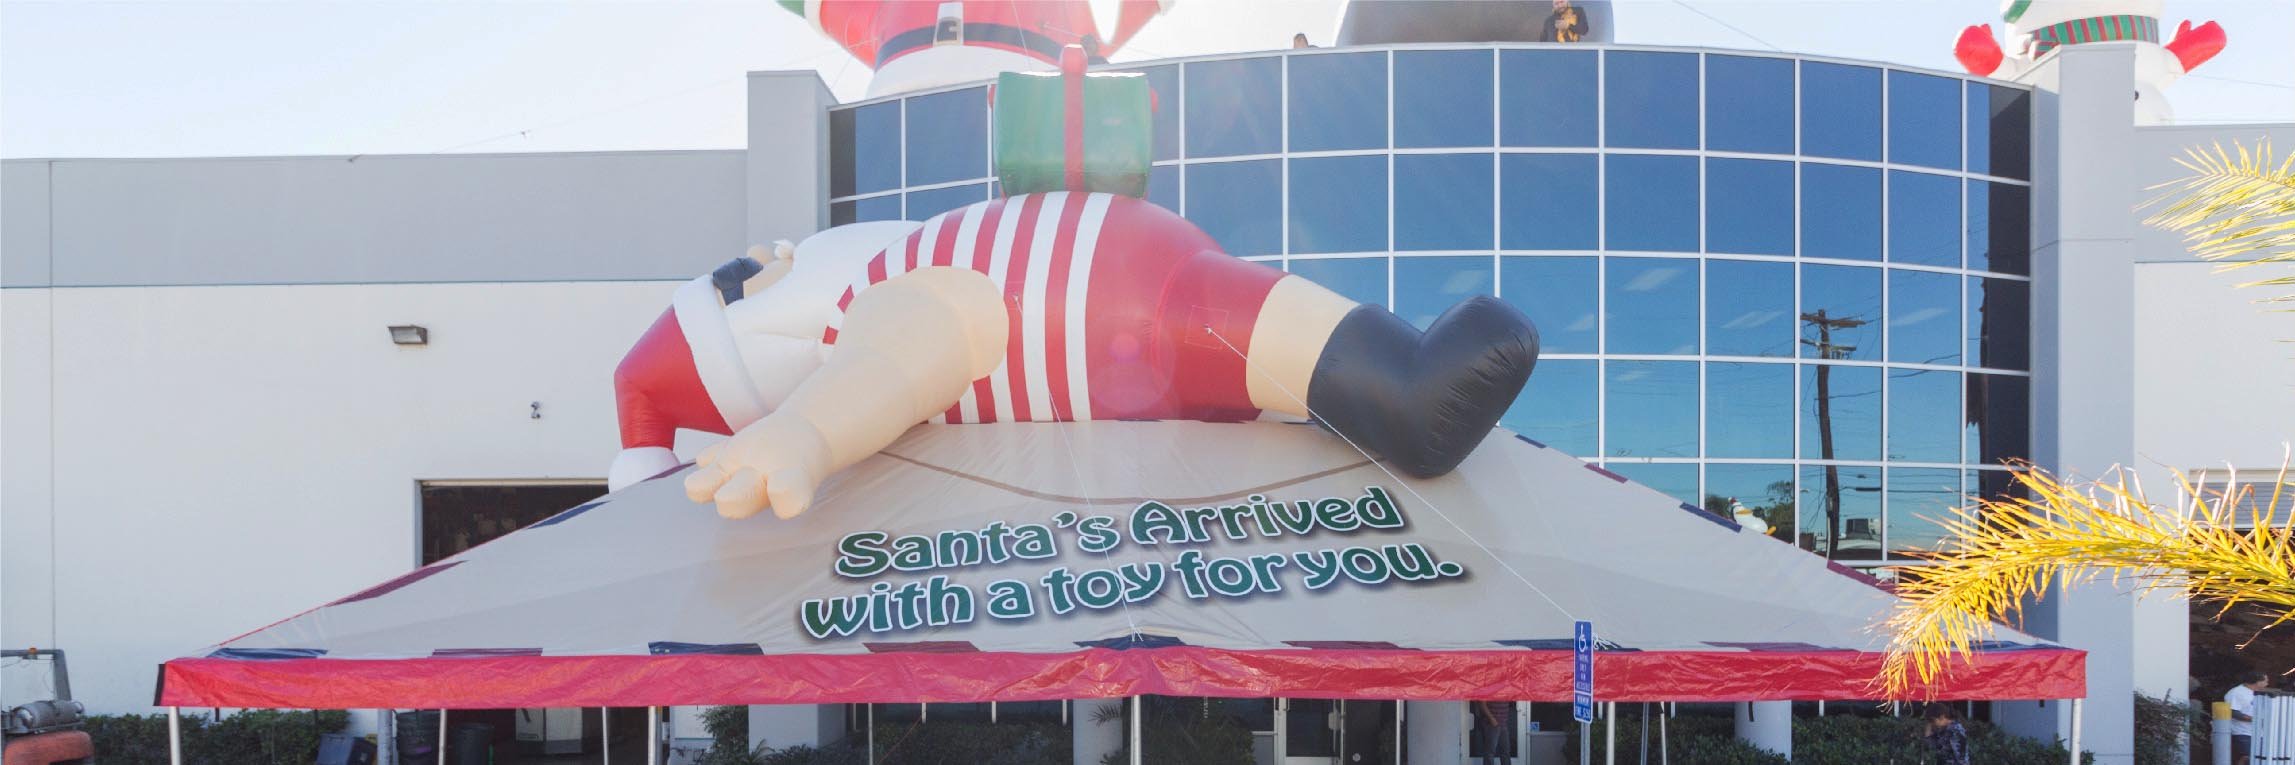 Lazy Santa Claus inflatable on tent in front of the Promotional Design Group building